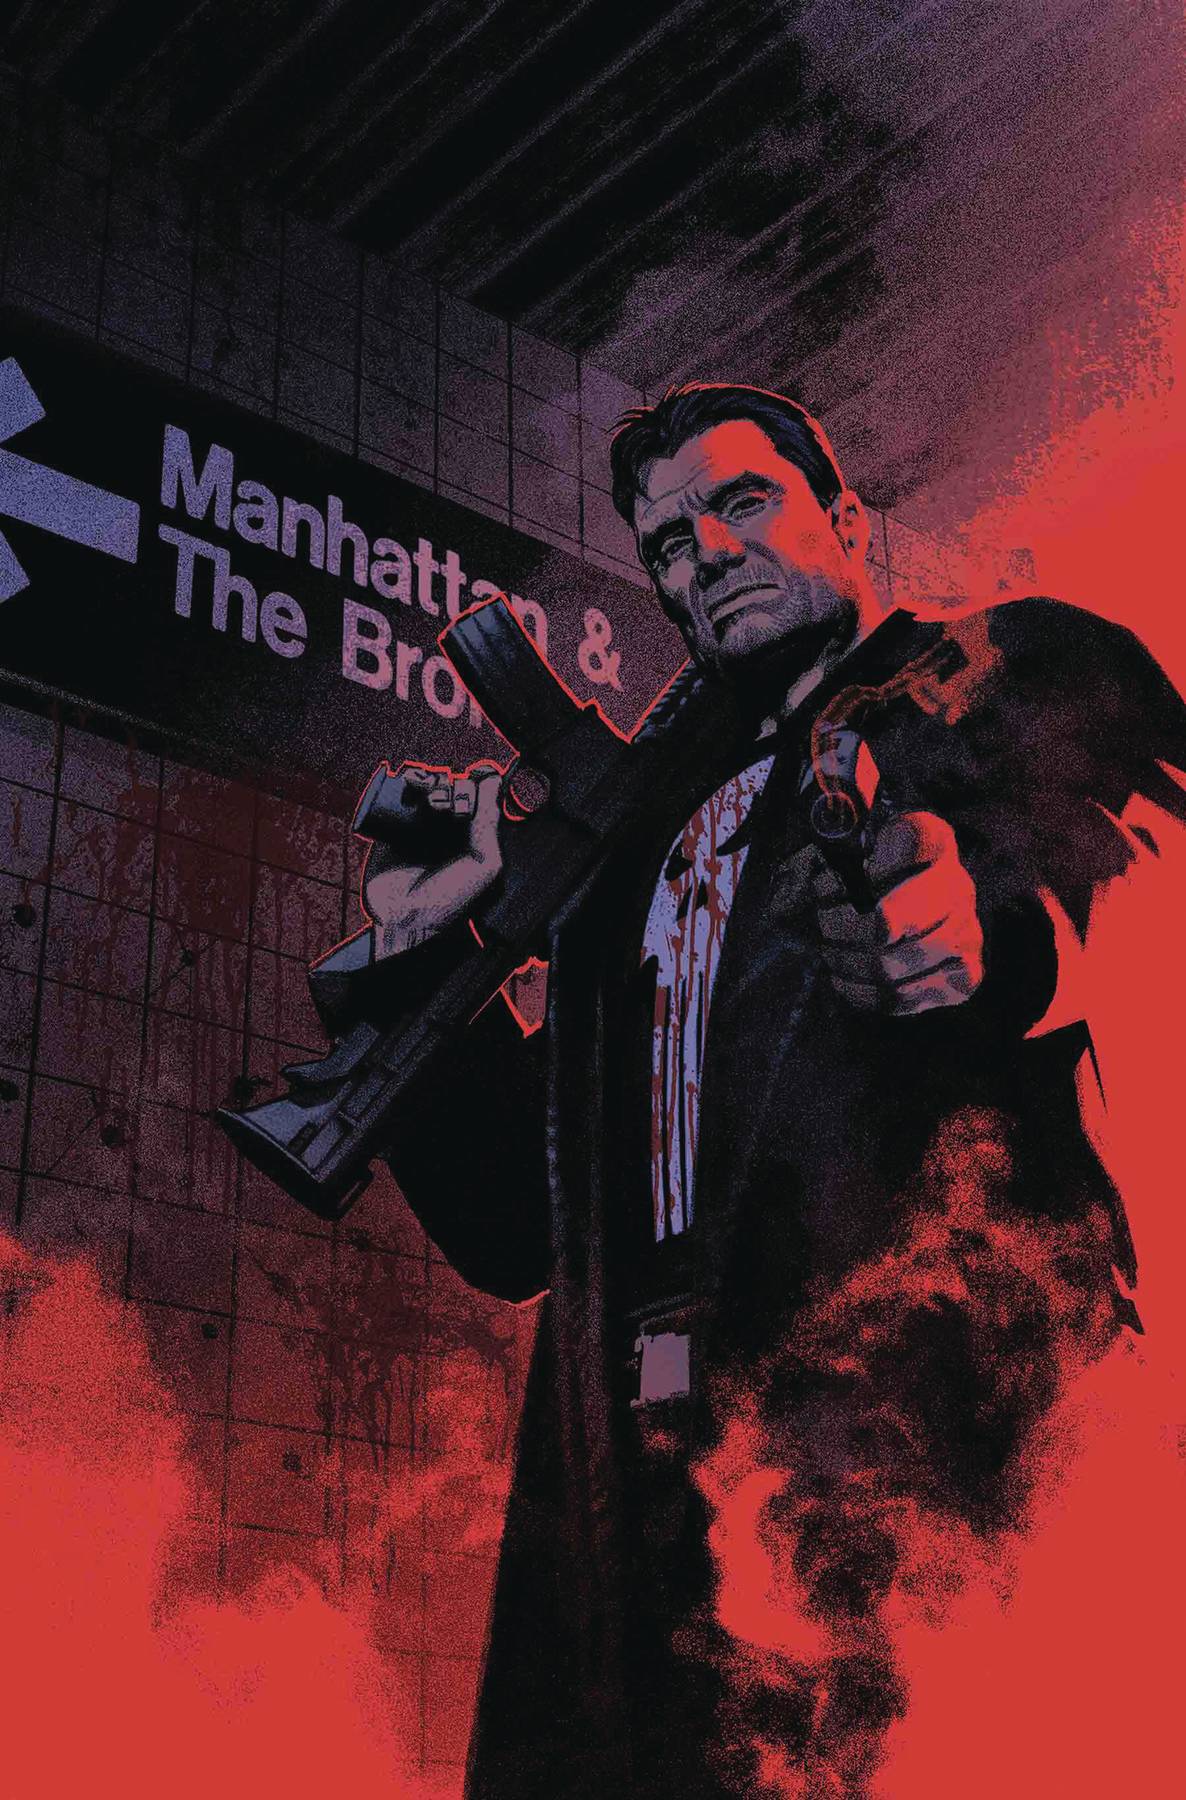 PUNISHER #1 BY SMALLWOOD POSTER